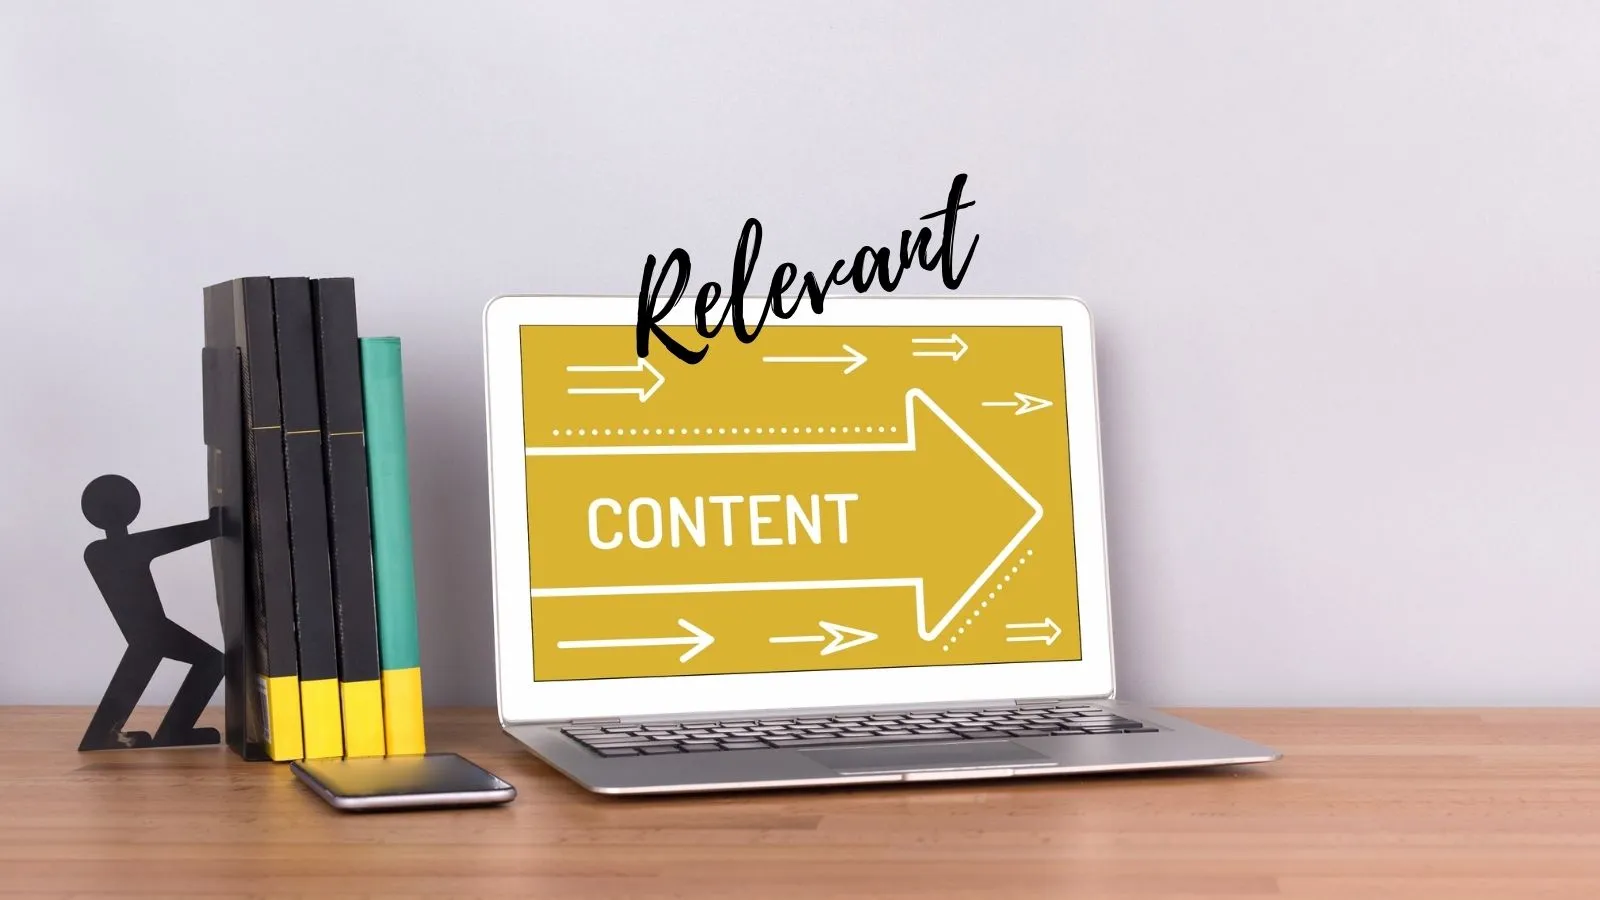 use relevant content in your marketing